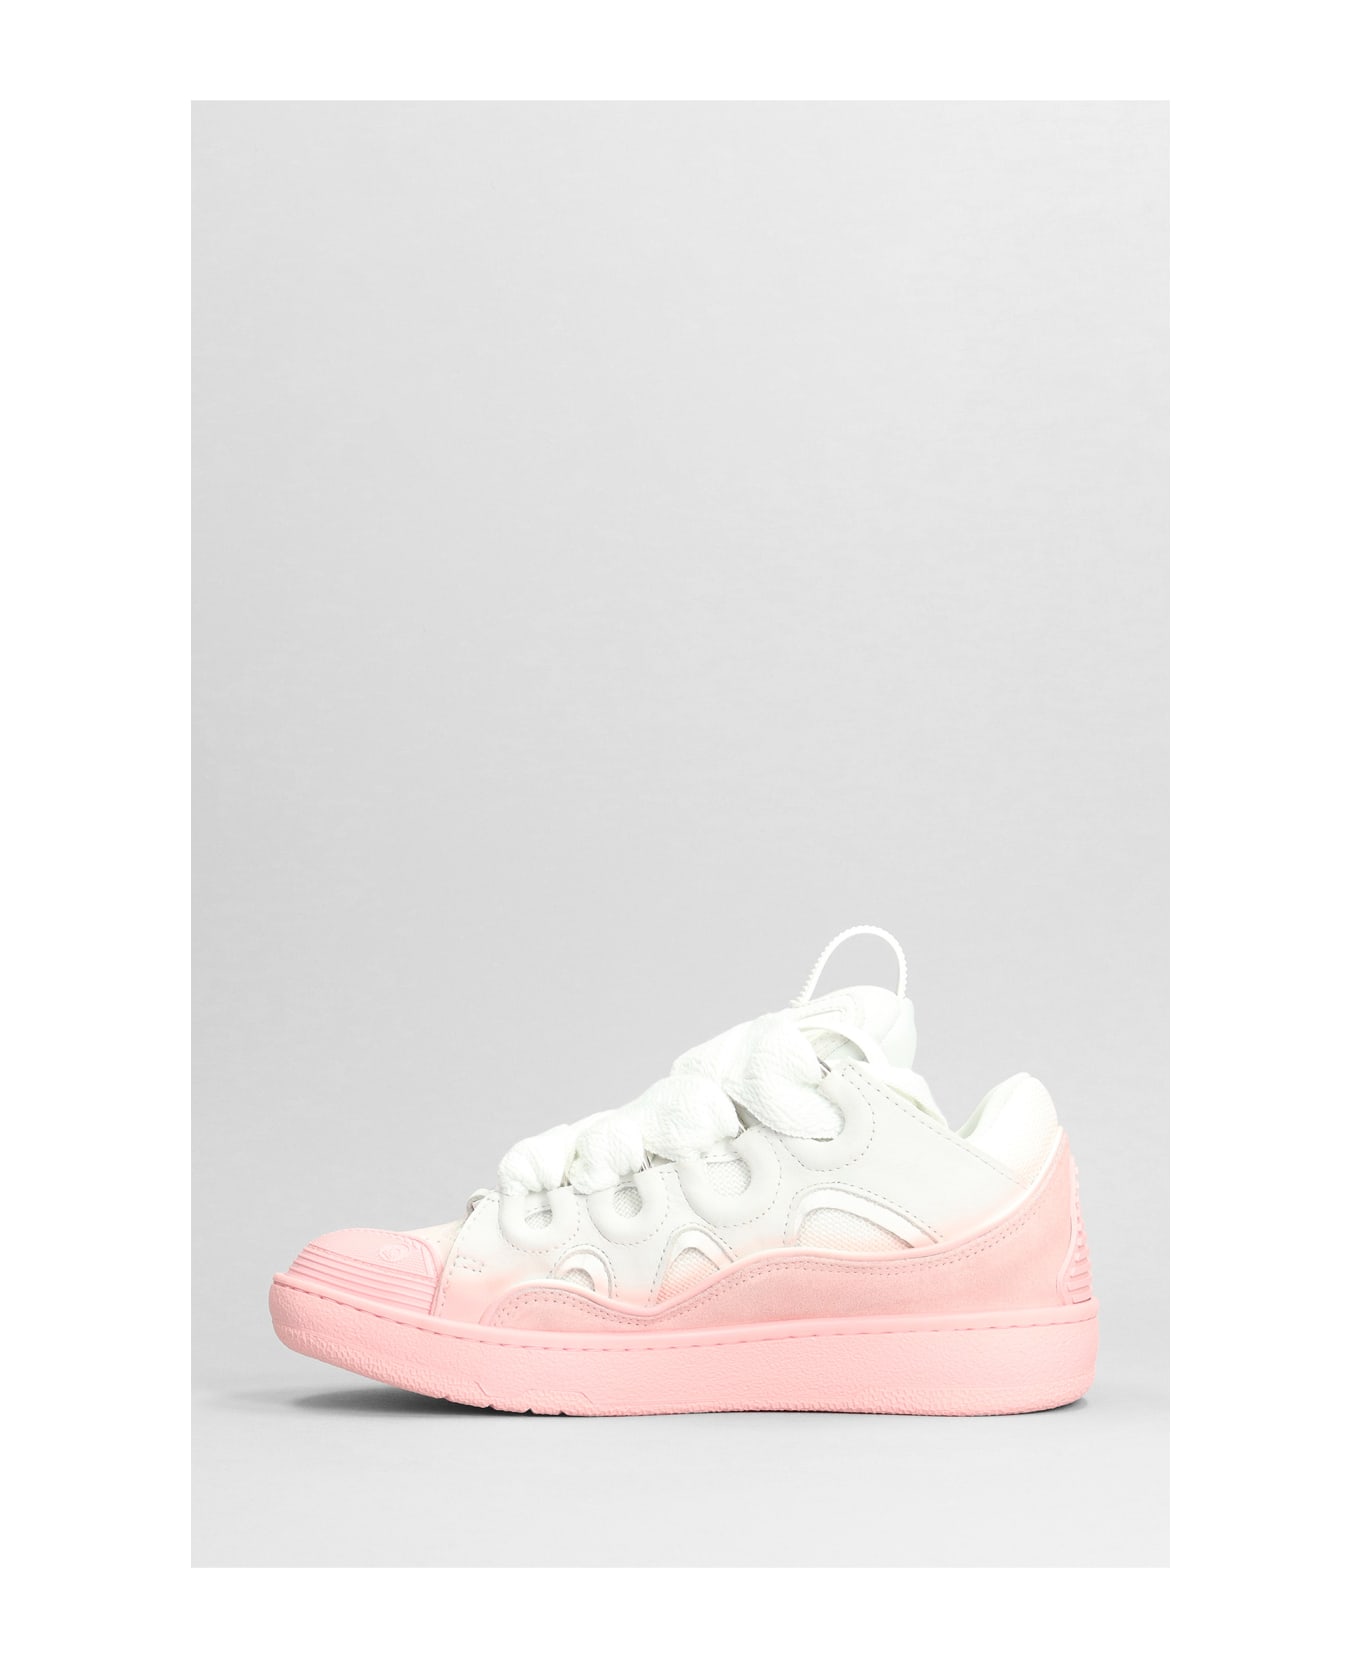 Lanvin White And Pink Curb Sneakers In Leather - Pink